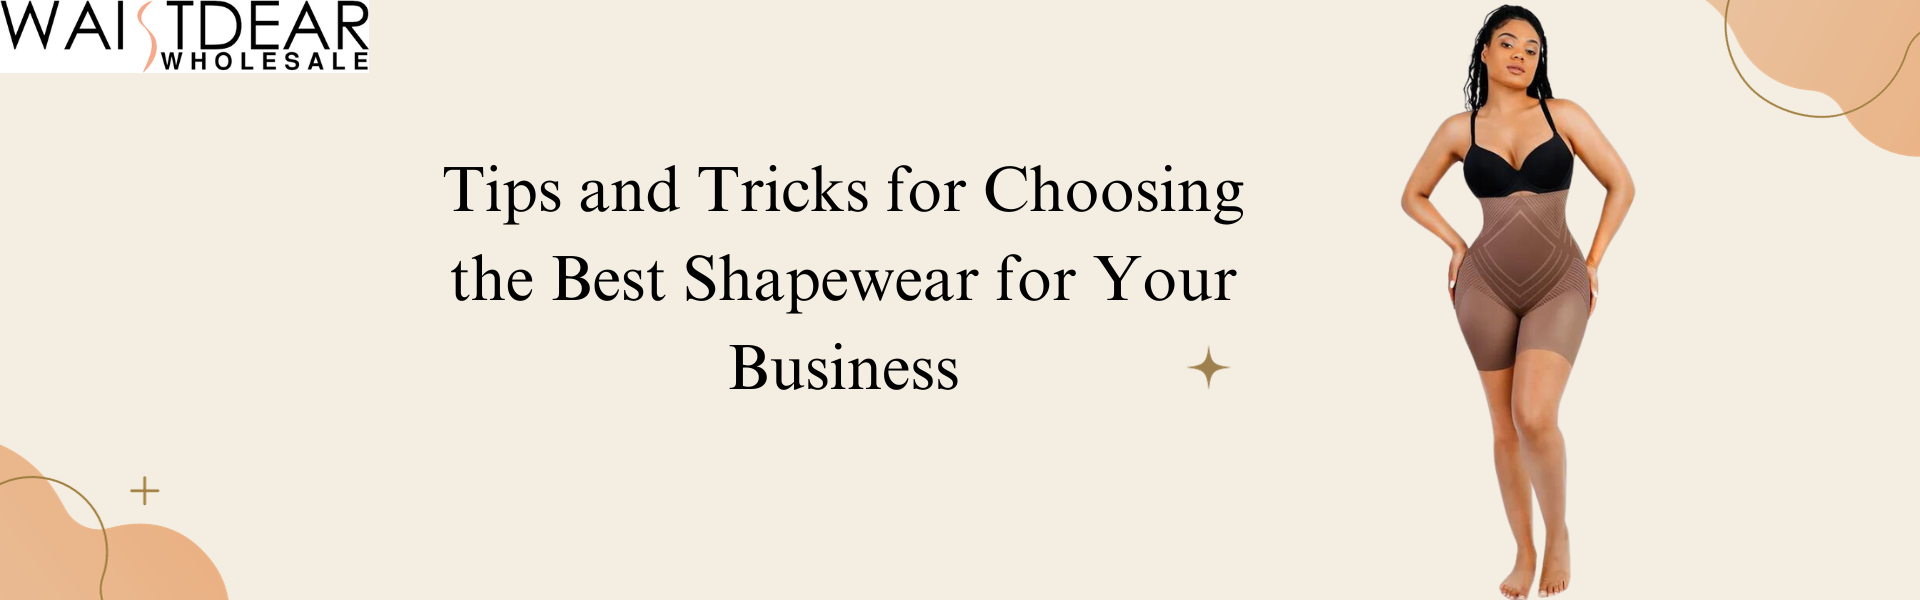 Tips and Tricks for Choosing the Best Shapewear for Your Business